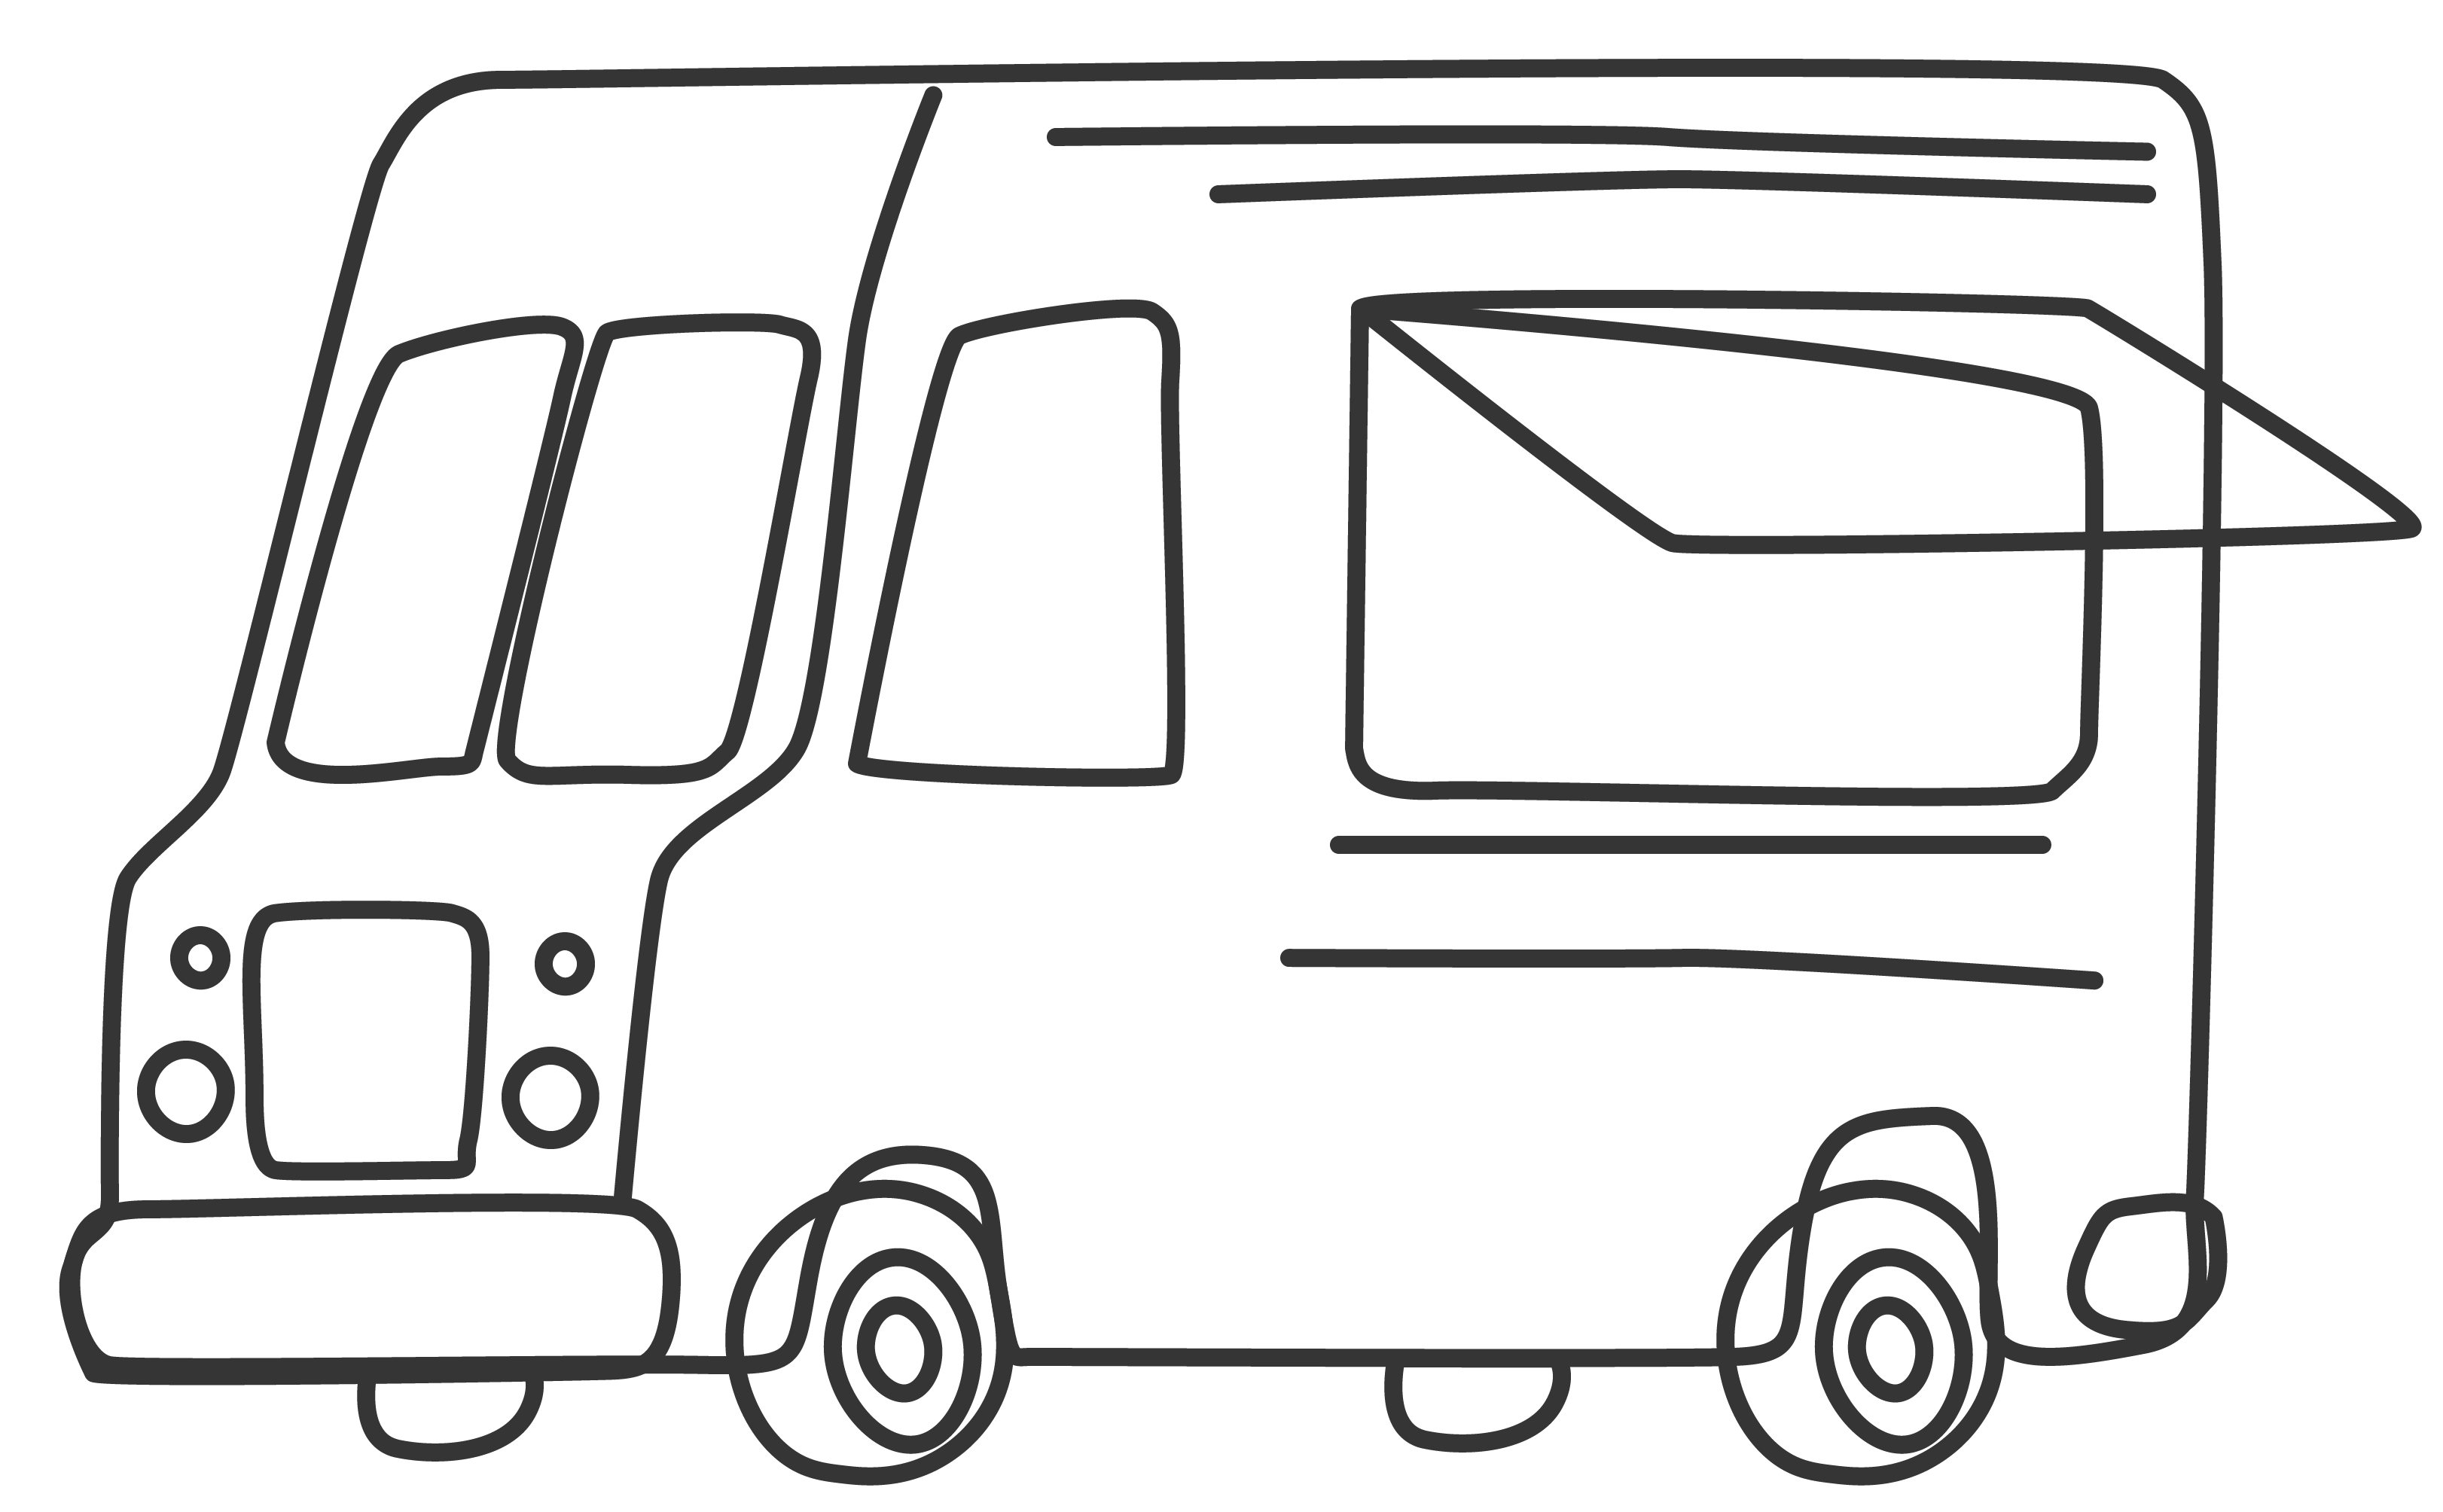 An doodle of a food truck